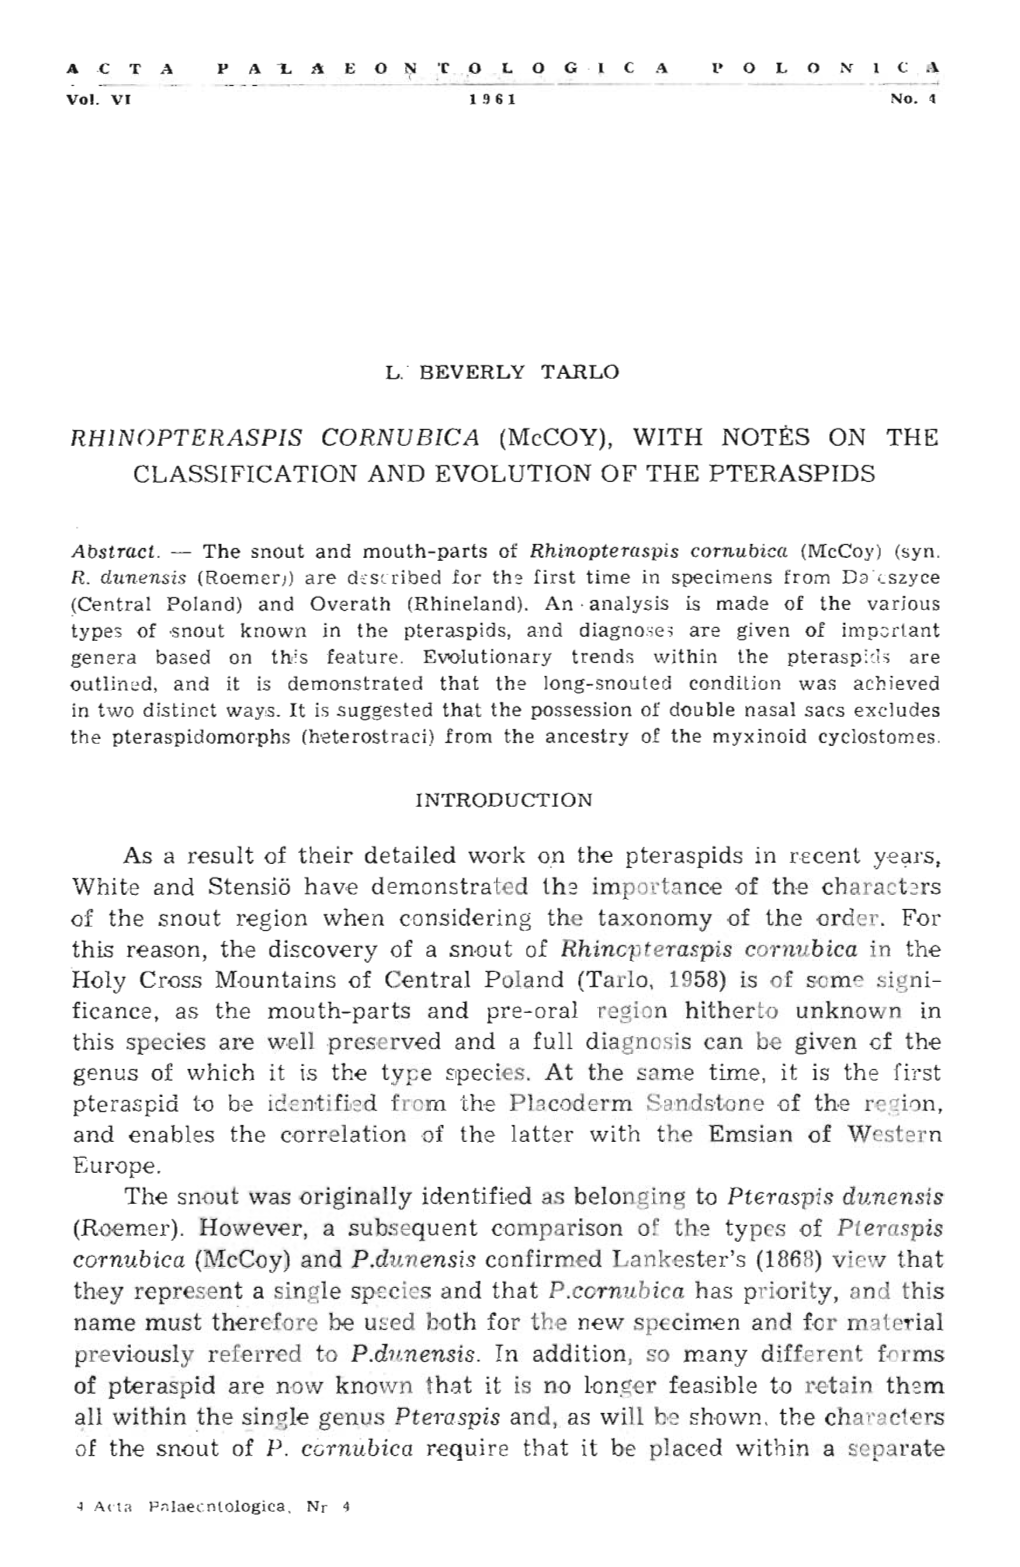 RHINOPTERASPIS CORNUBICA (Mccoy), with NOTES on the CLASSIFICATION and EVOLUTION of the P TERASPIDS